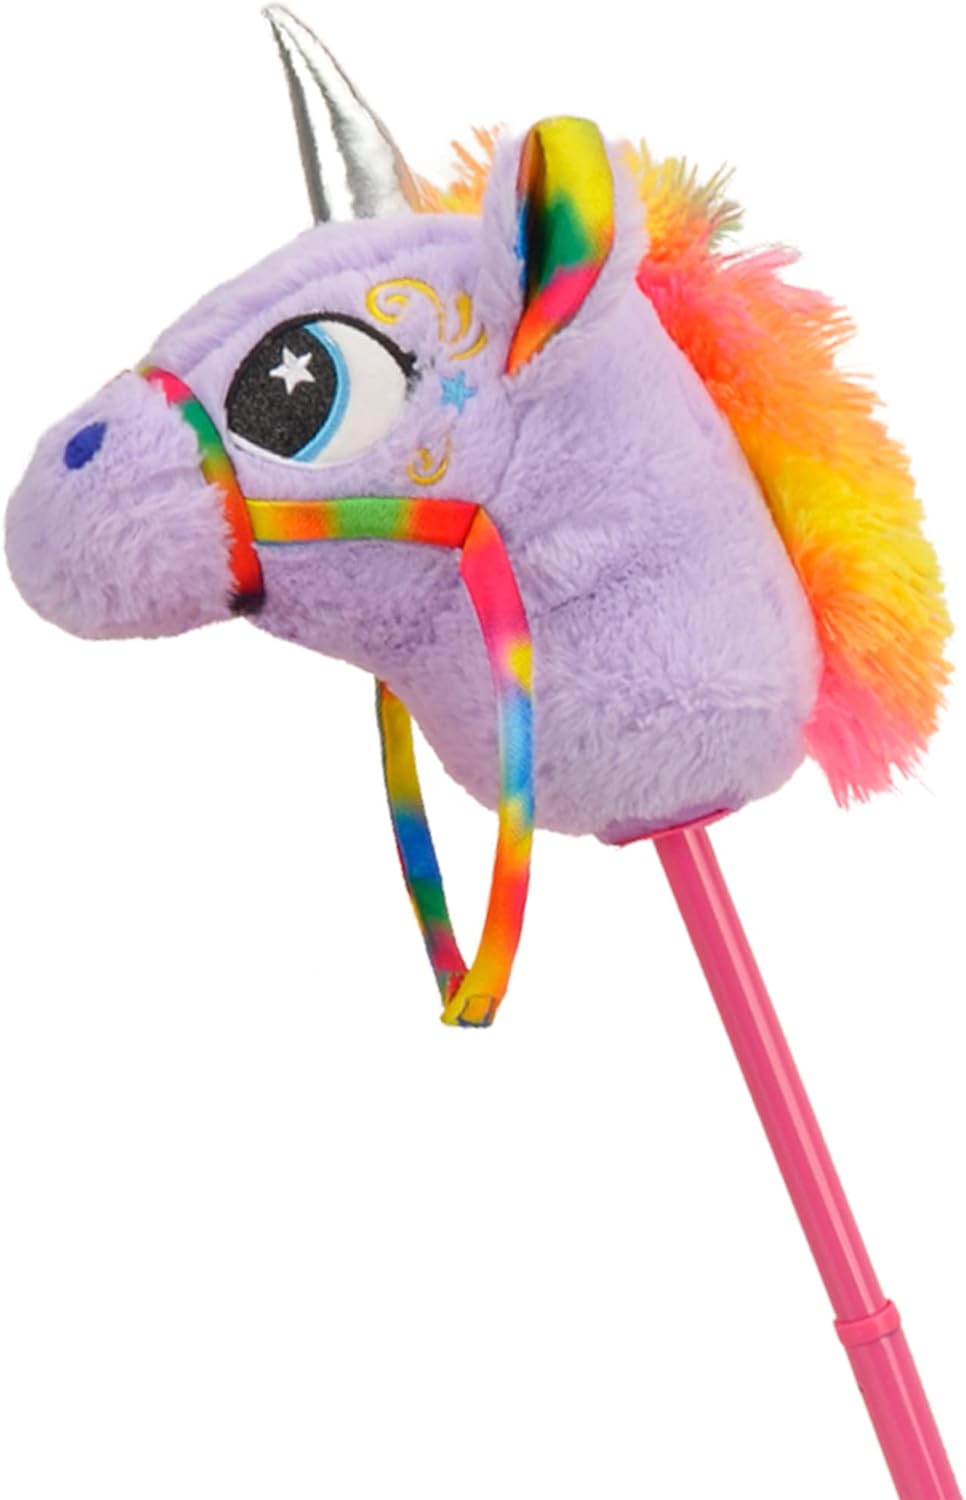 Hobby Horse Toy Galloping Sounds Adjustable Telescopic Stick Toddler Ride 36 In 